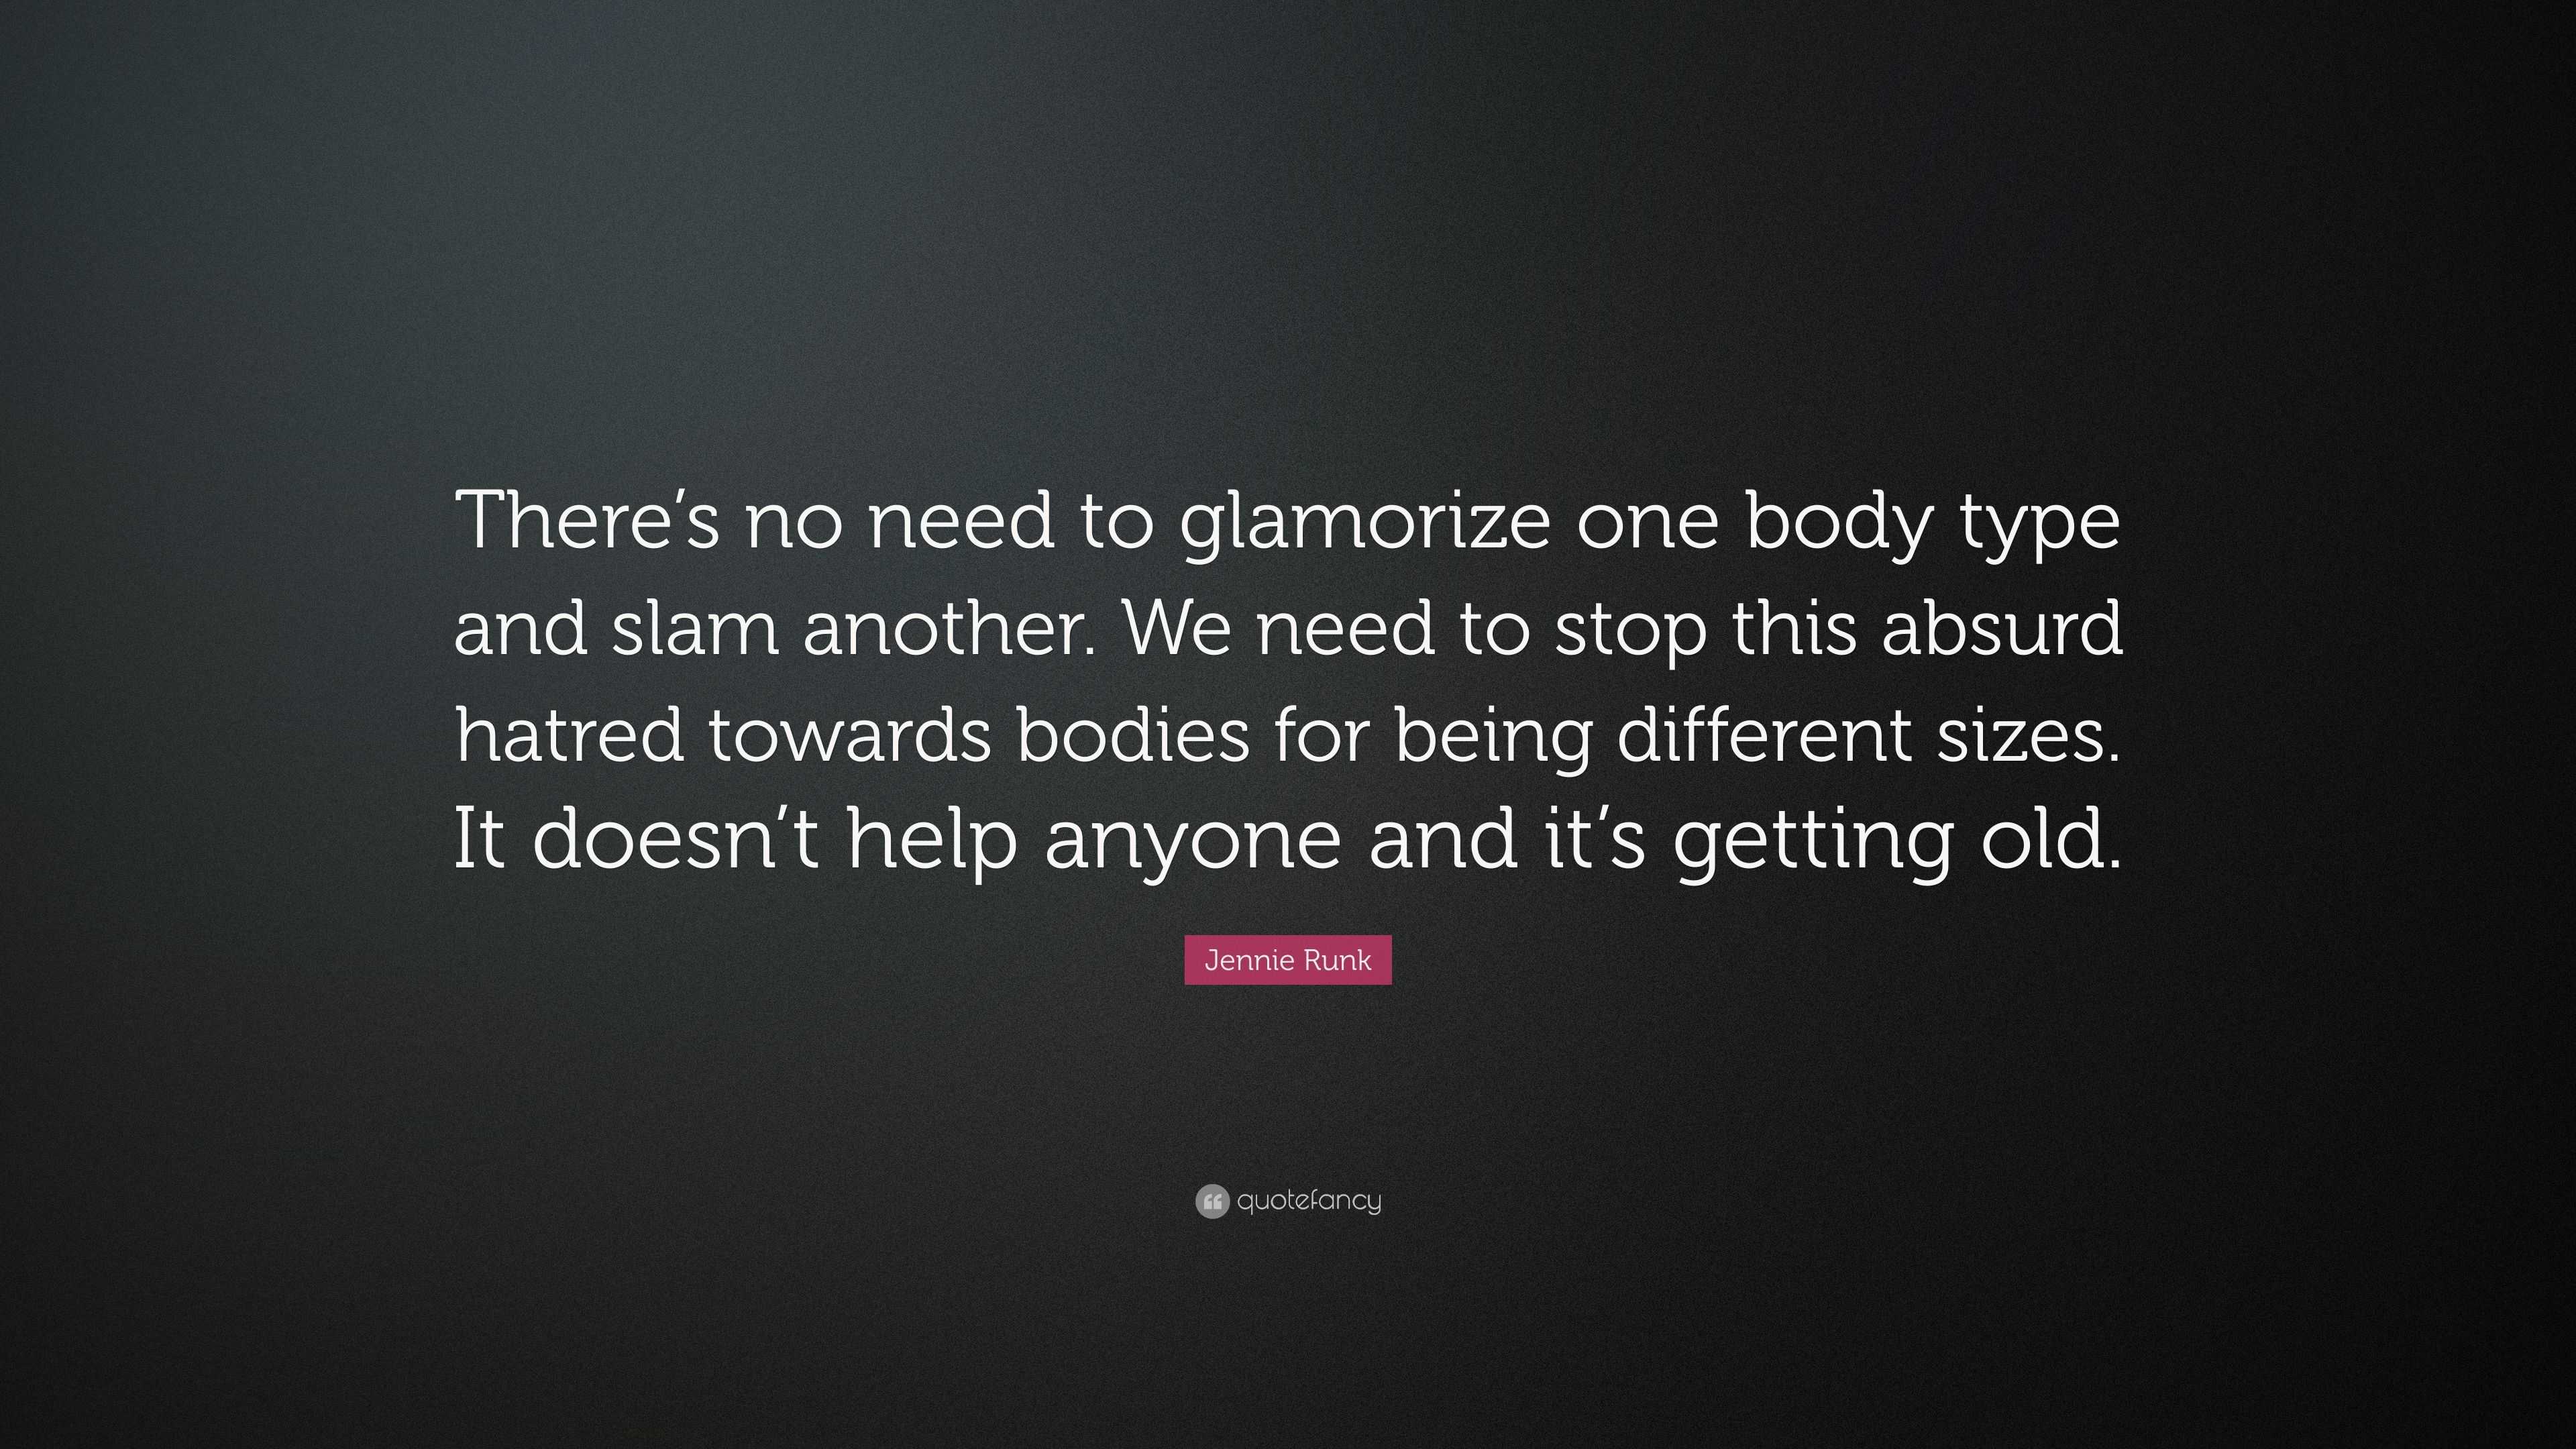 Jennie Runk Quote: “There's no need to glamorize one body type and slam  another. We need to stop this absurd hatred towards bodies for being”